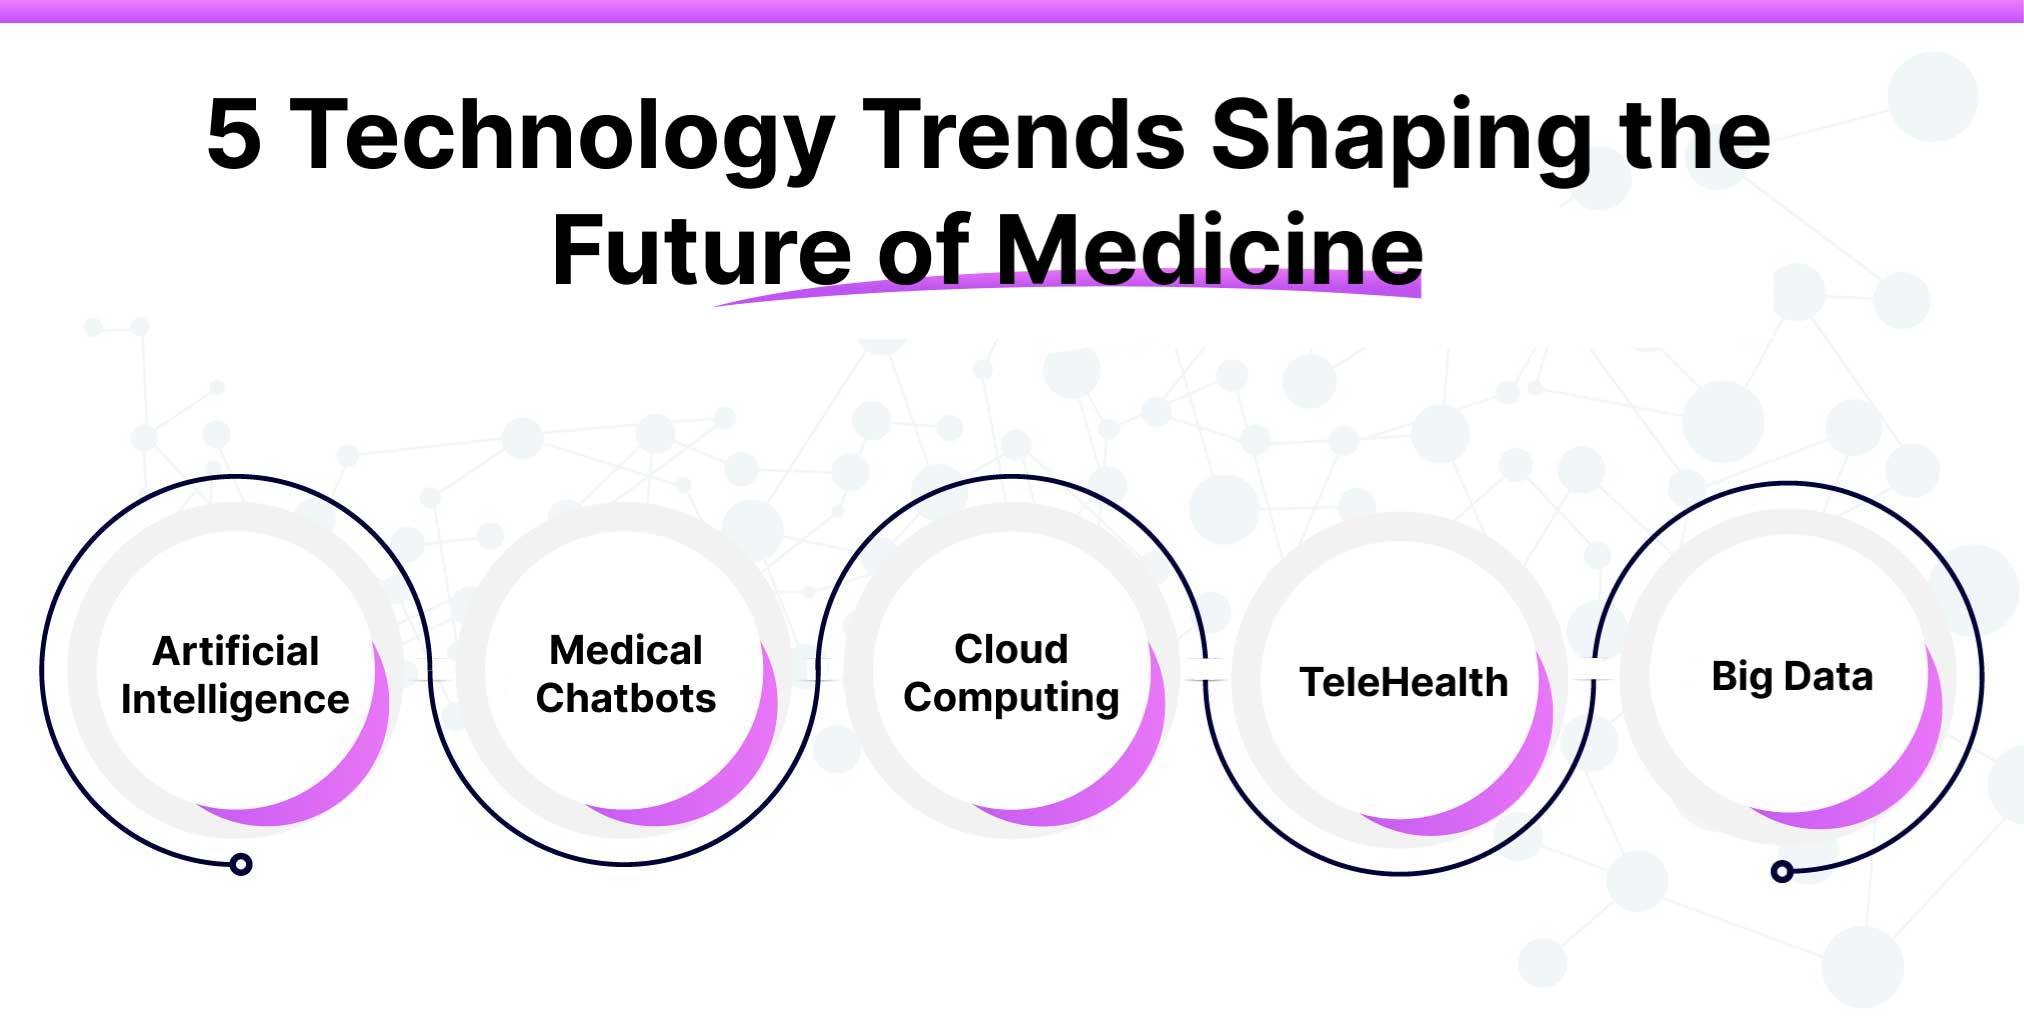 5 Technology Trends Shaping the Future of Medicine